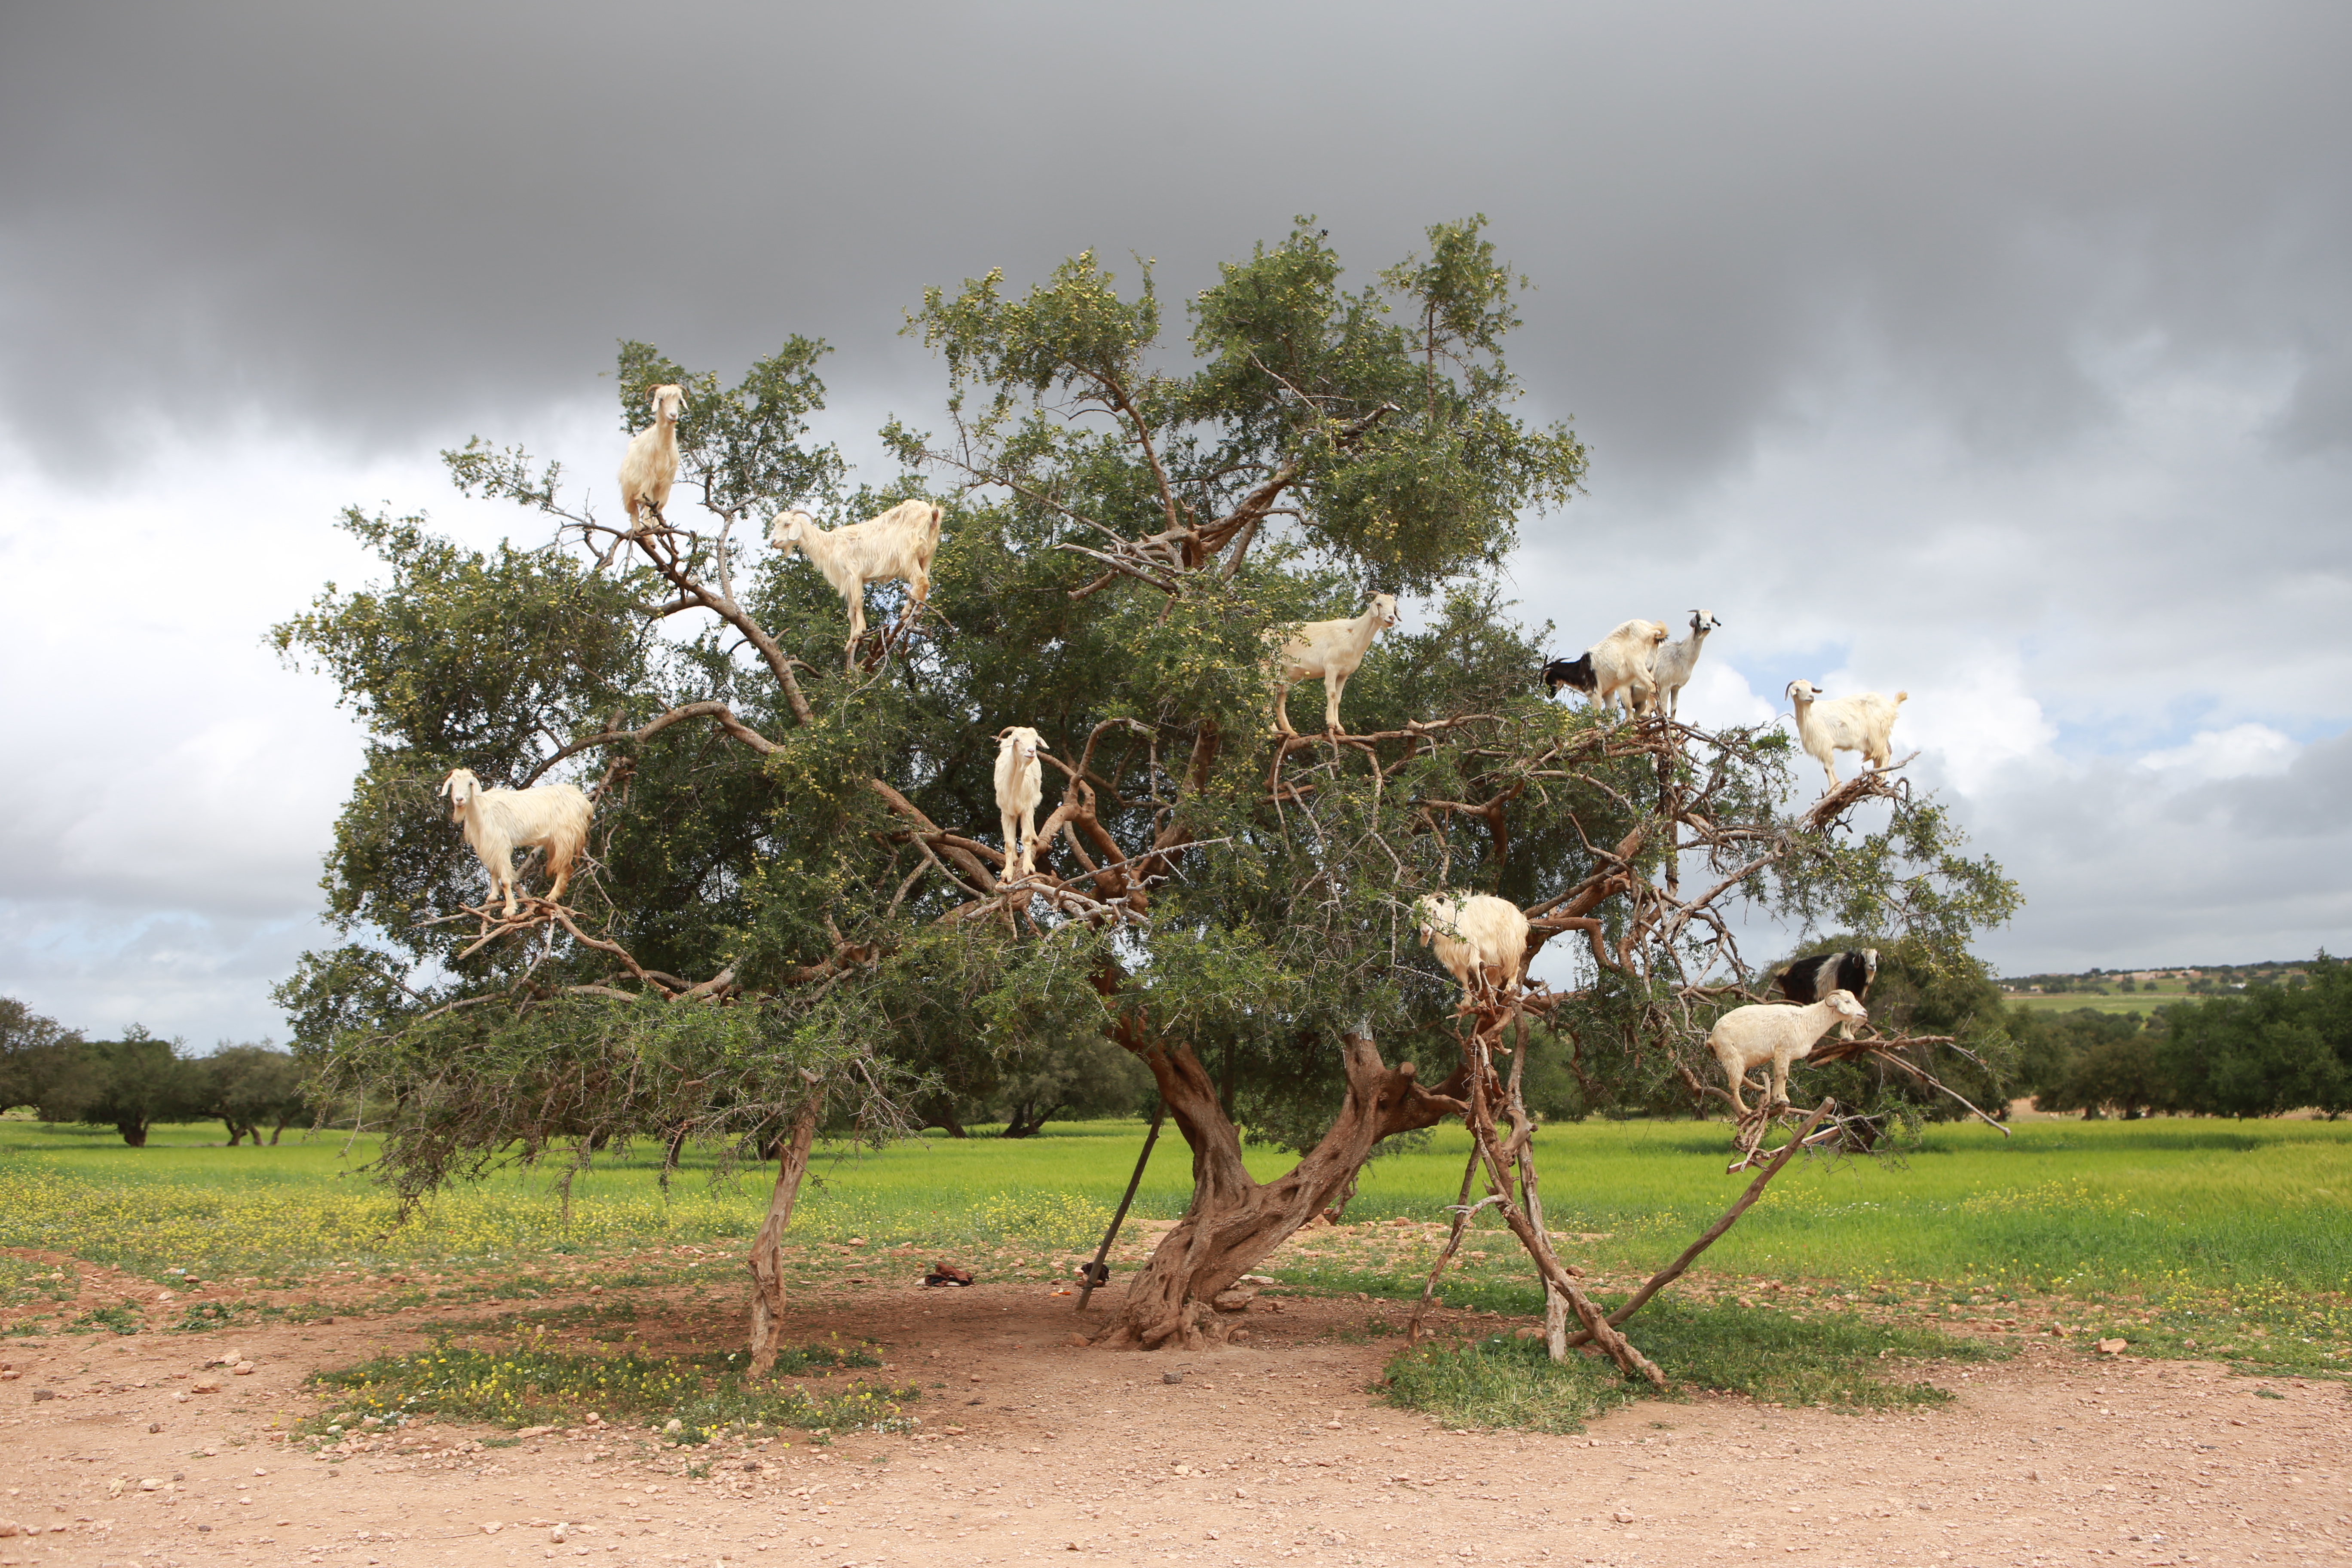 Climbing goats in a tree